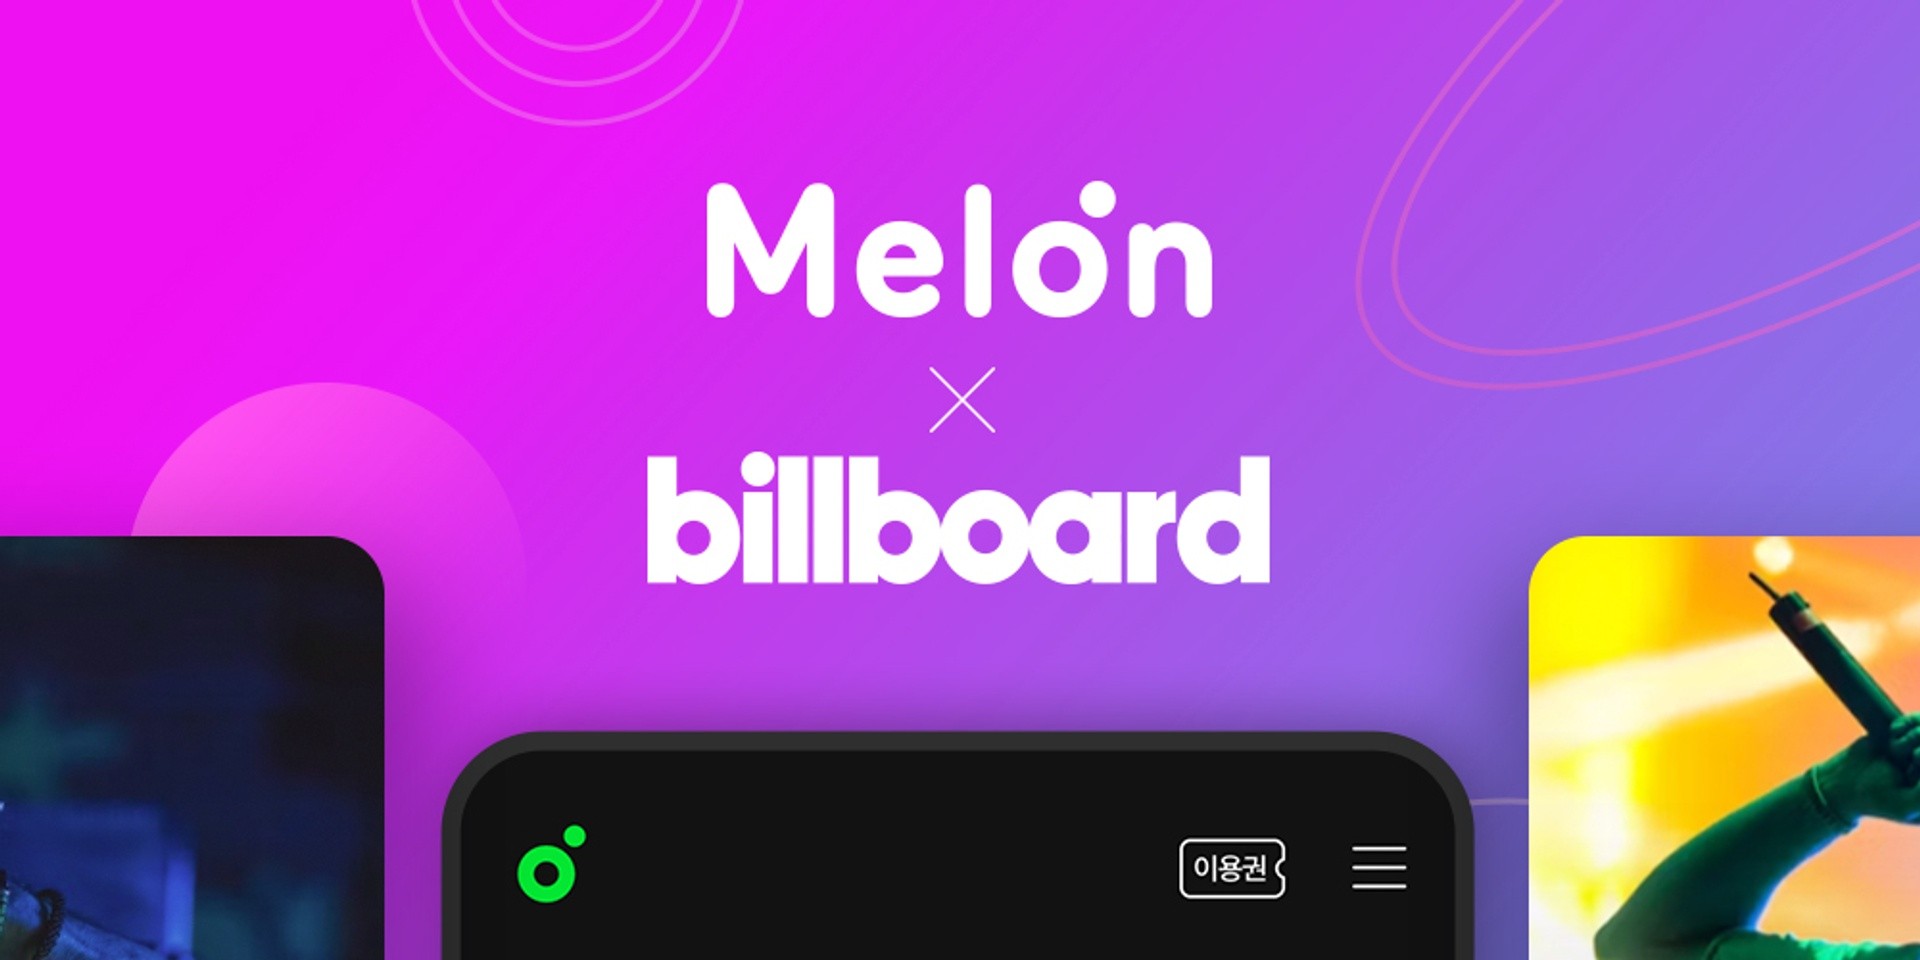 Melon streams will now be counted in Billboard's global music charts